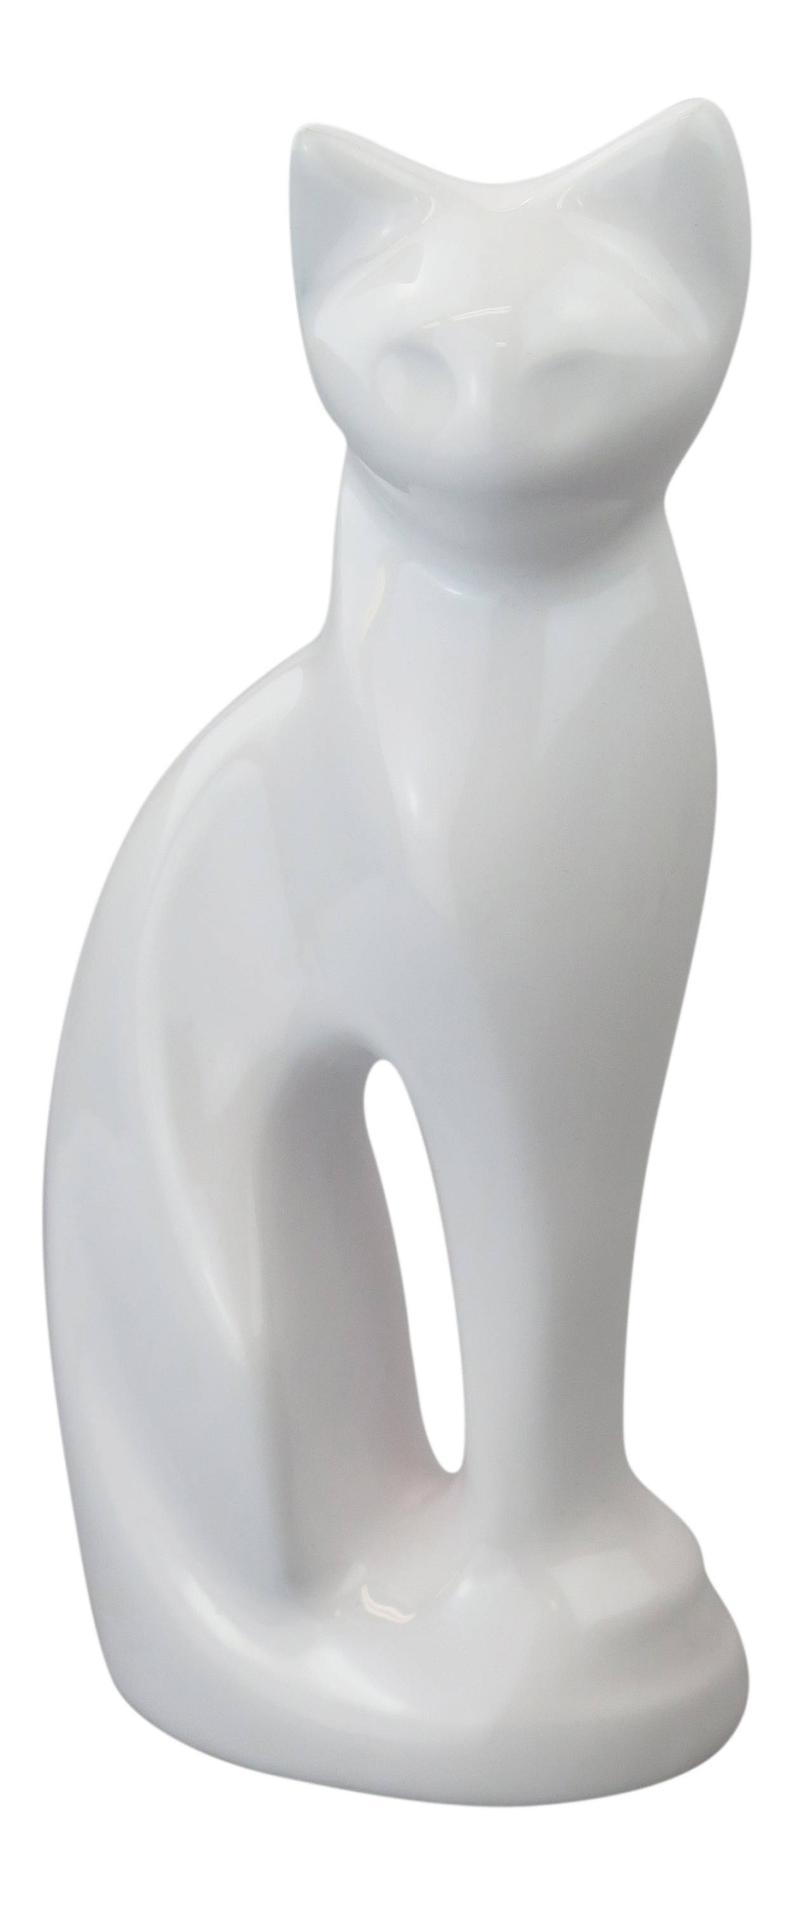 Cat Shaped Urn for Pet Cat Ashes Cremation Memorial